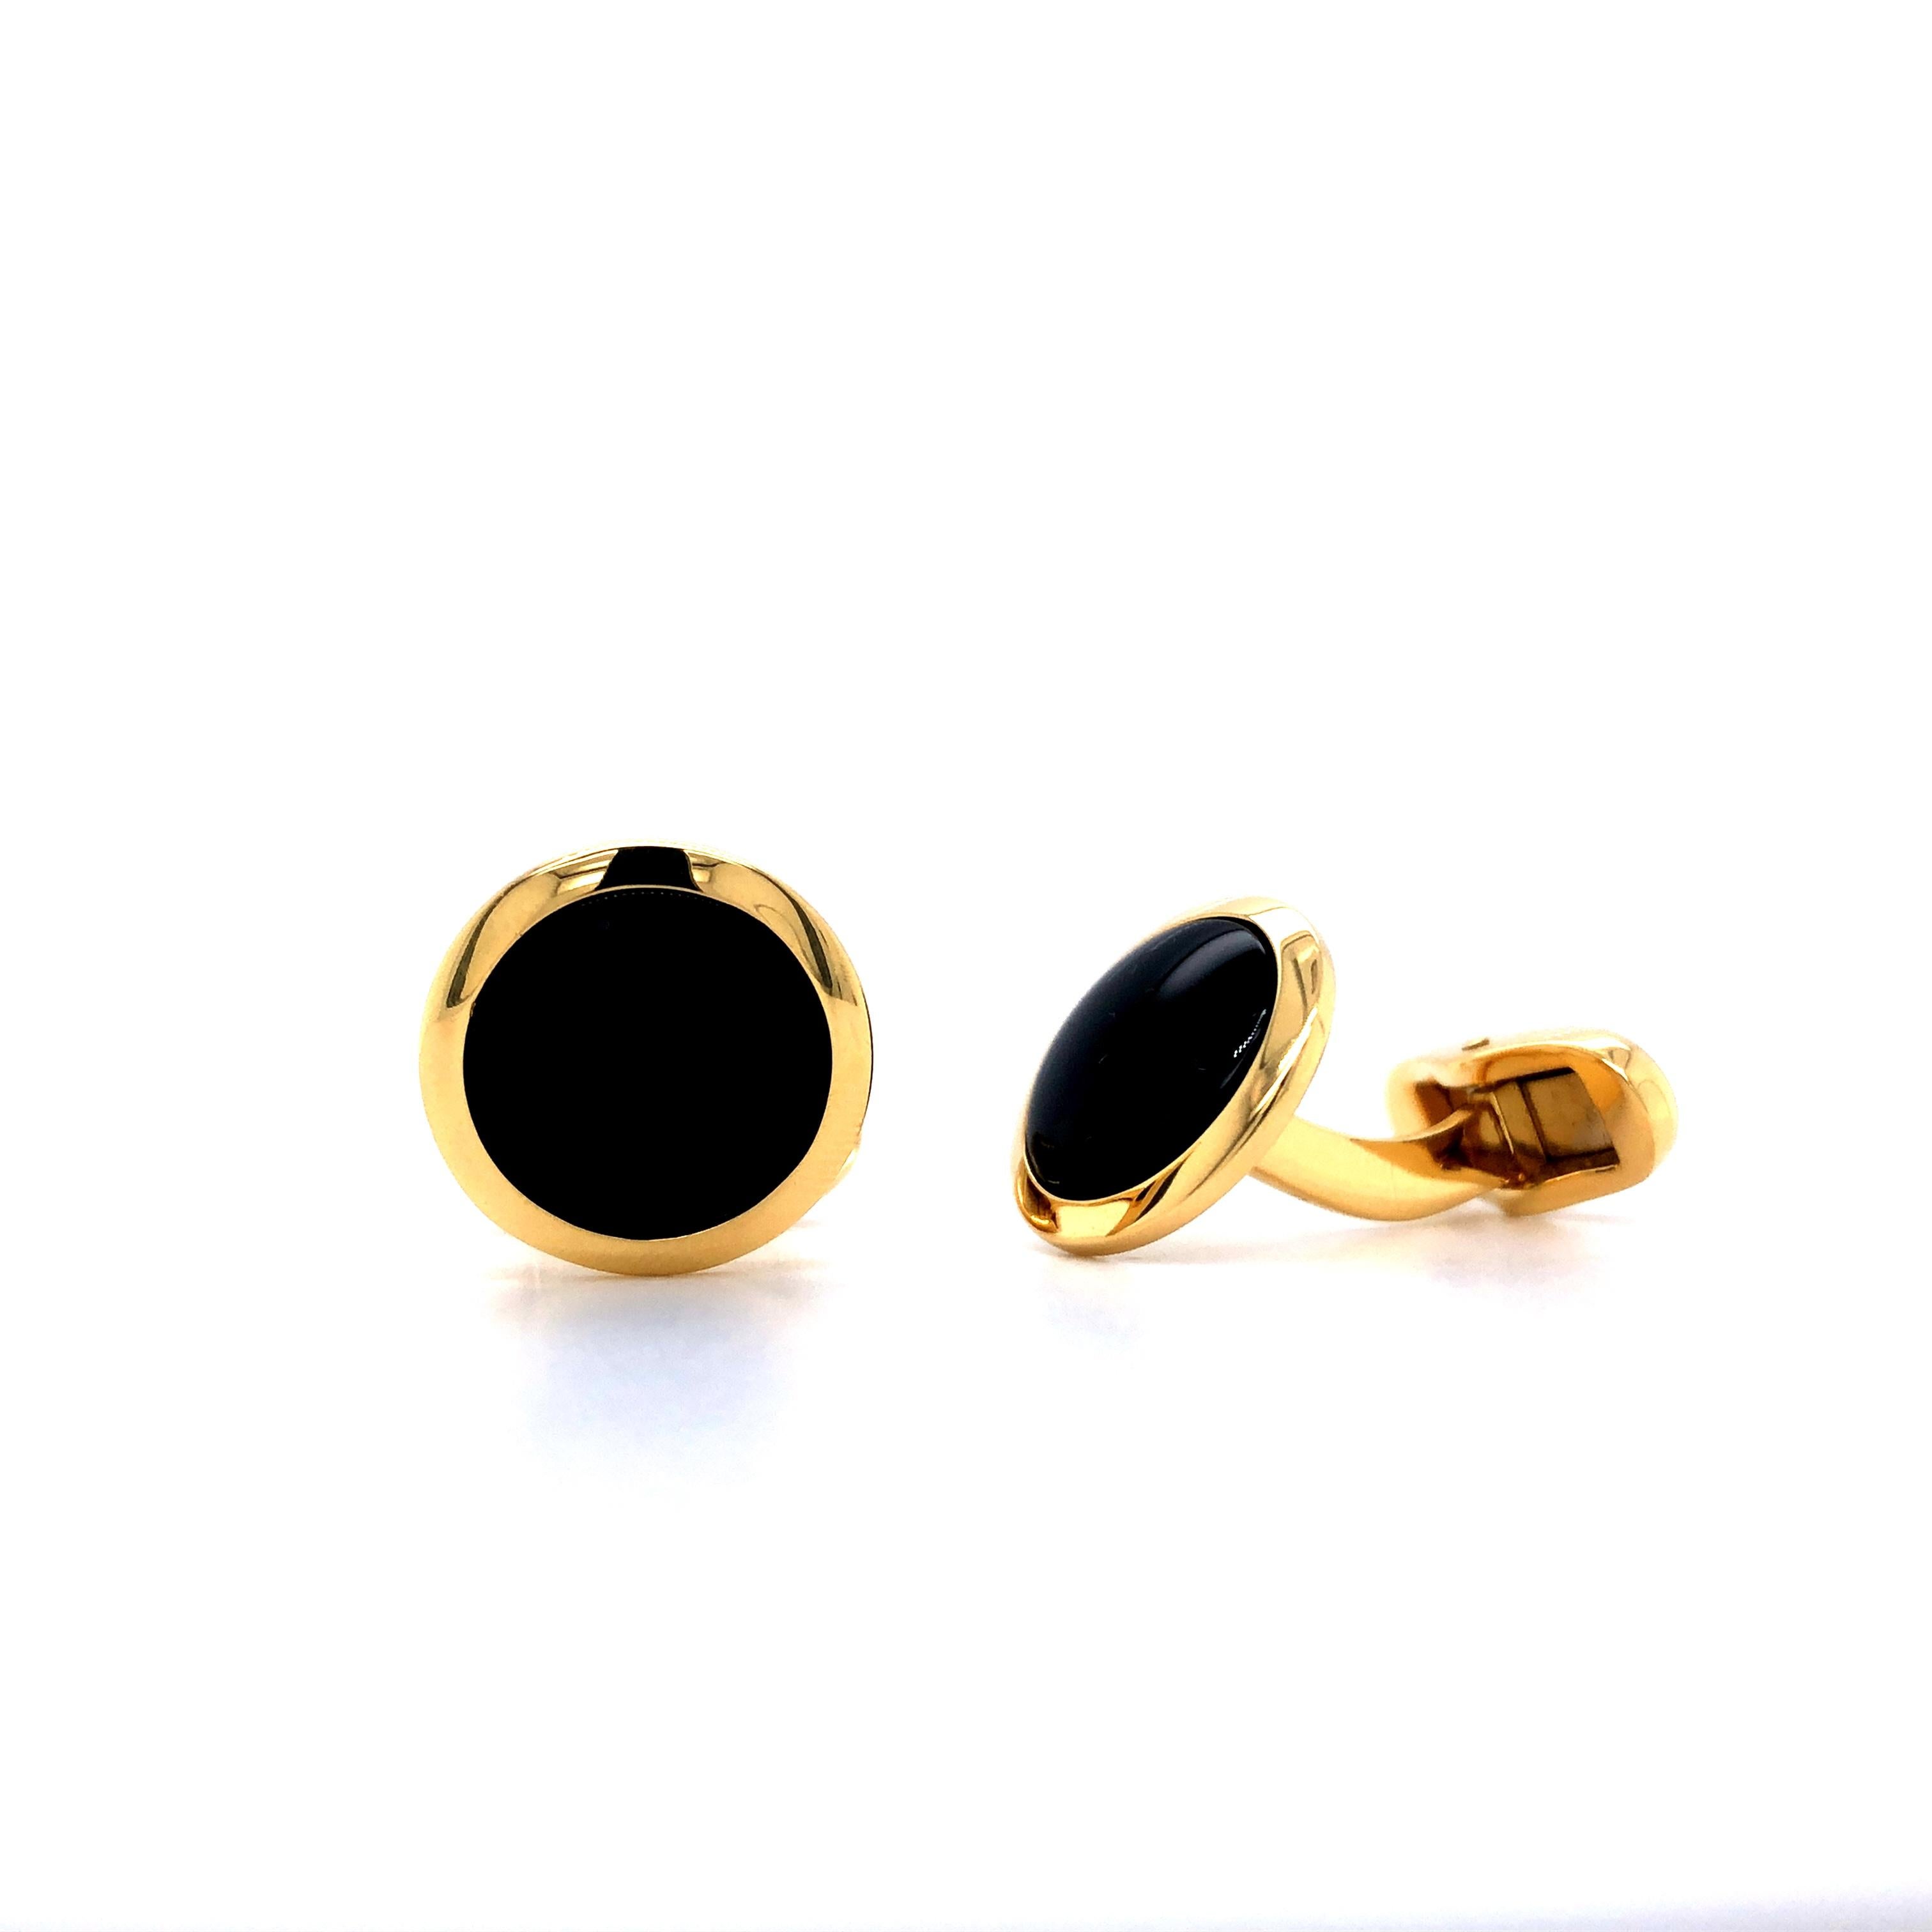 Round Cufflinks with Domed Bezel, 18k Yellow Gold, Onyx Inlays For Sale 1